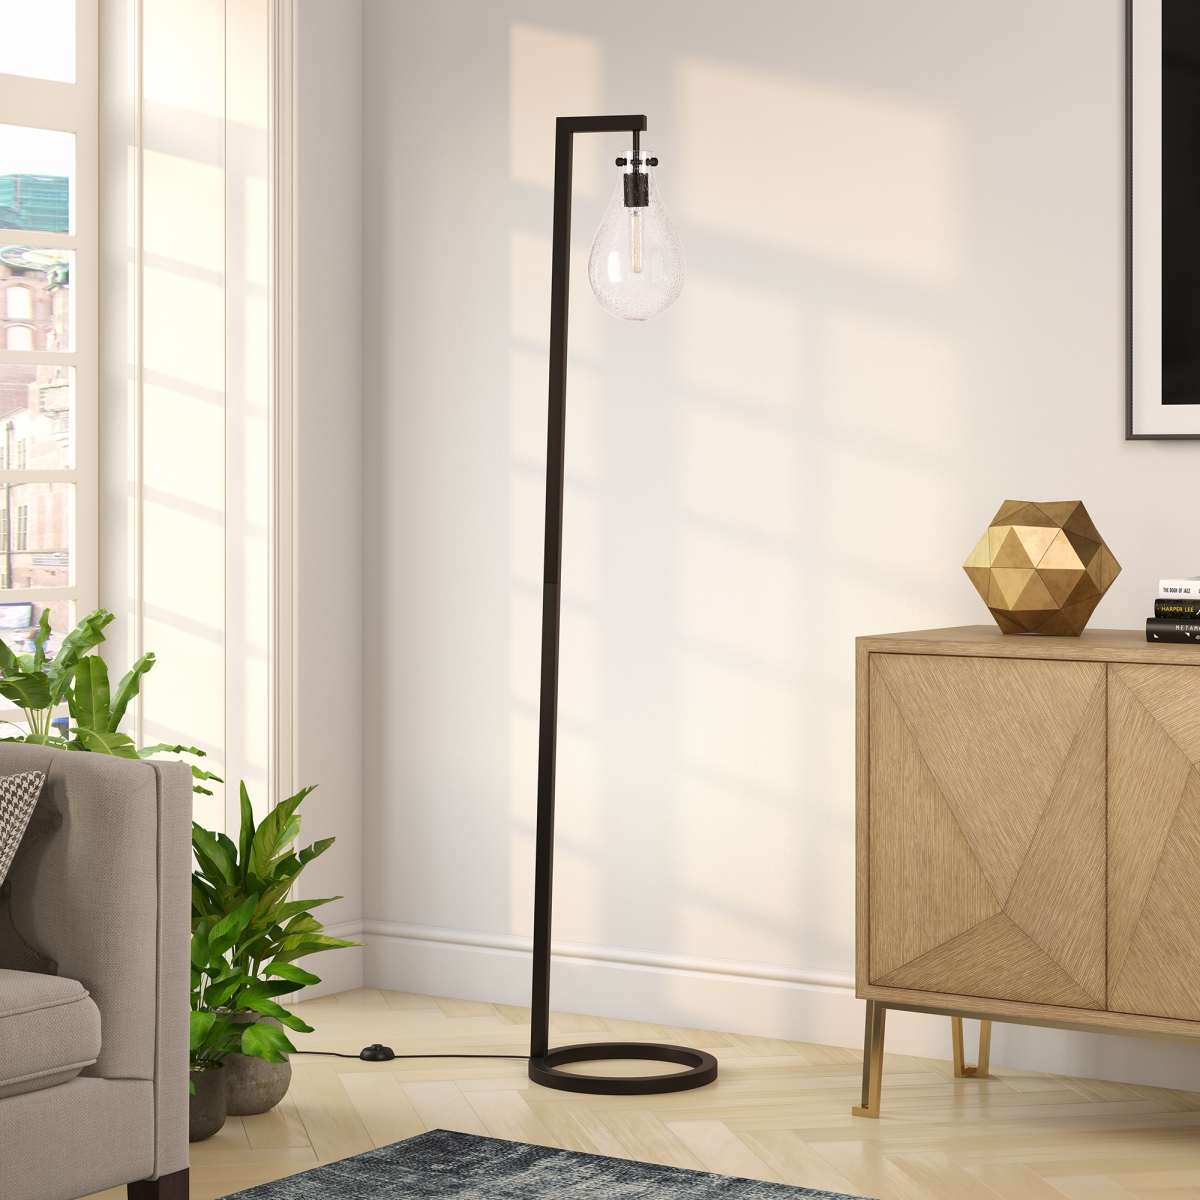 Picture of Henn & Hart FL0218 Weston Blackened Bronze Floor Lamp with Seeded Glass Shade